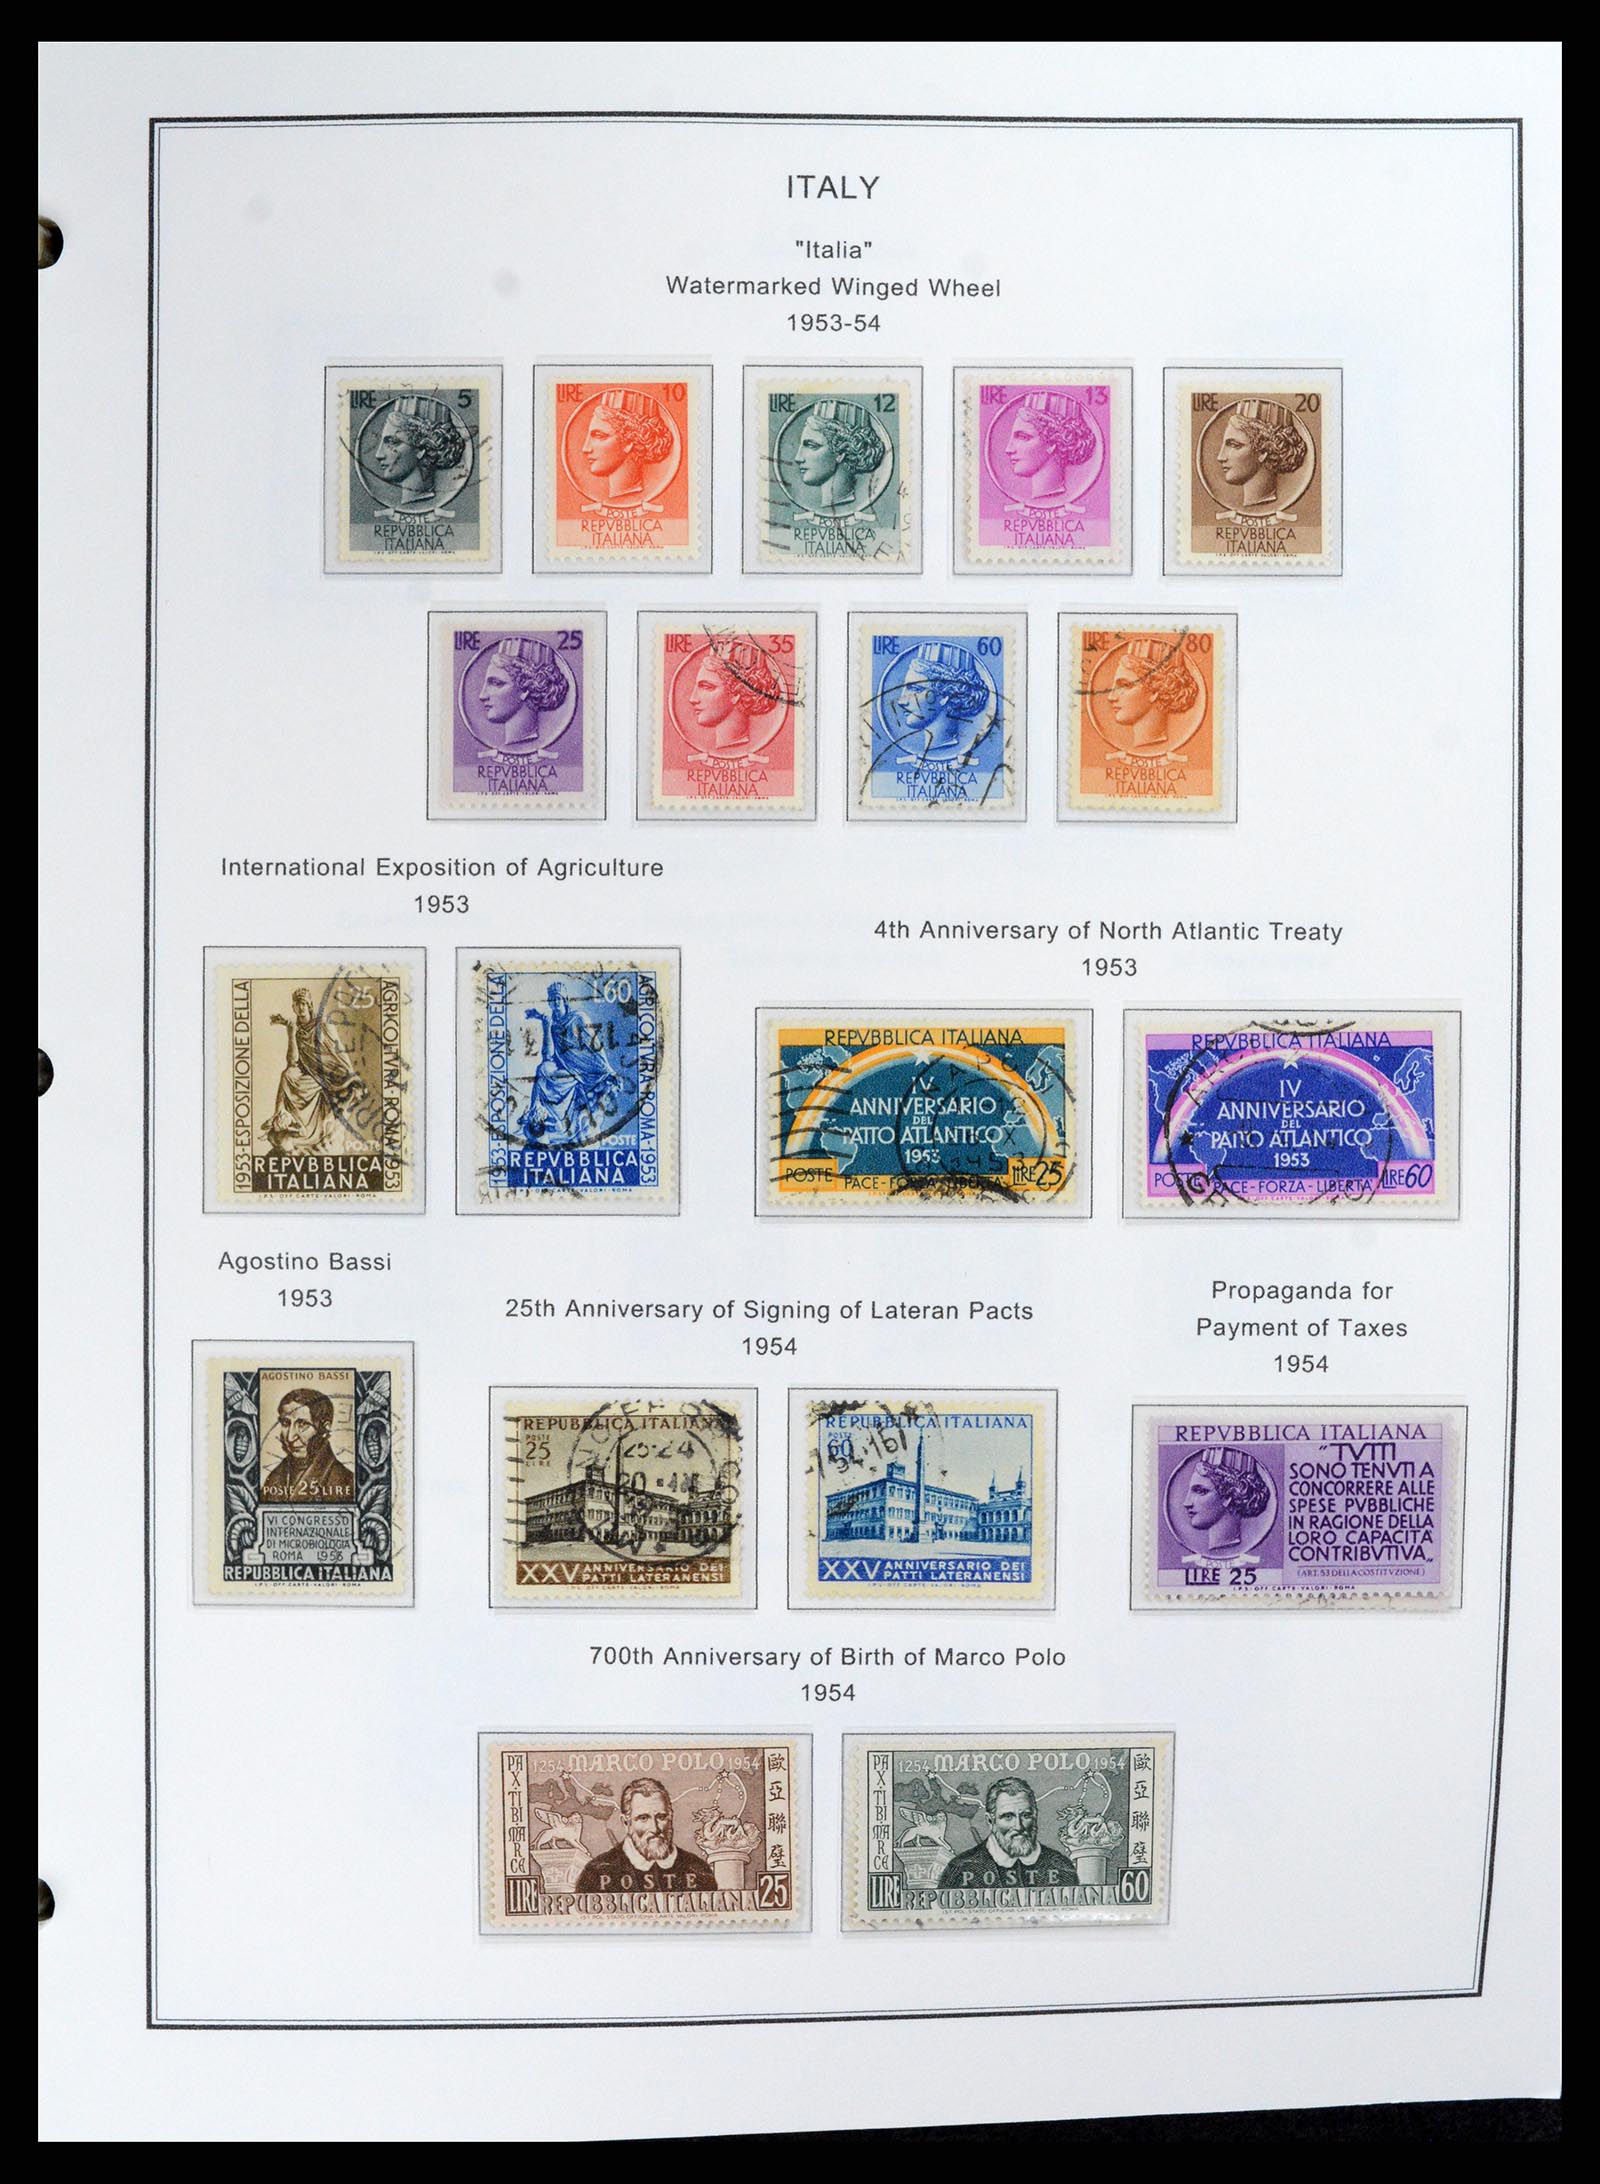 37726 043 - Stamp collection 37726 Italy, Italian territories and colonies 1863-2004